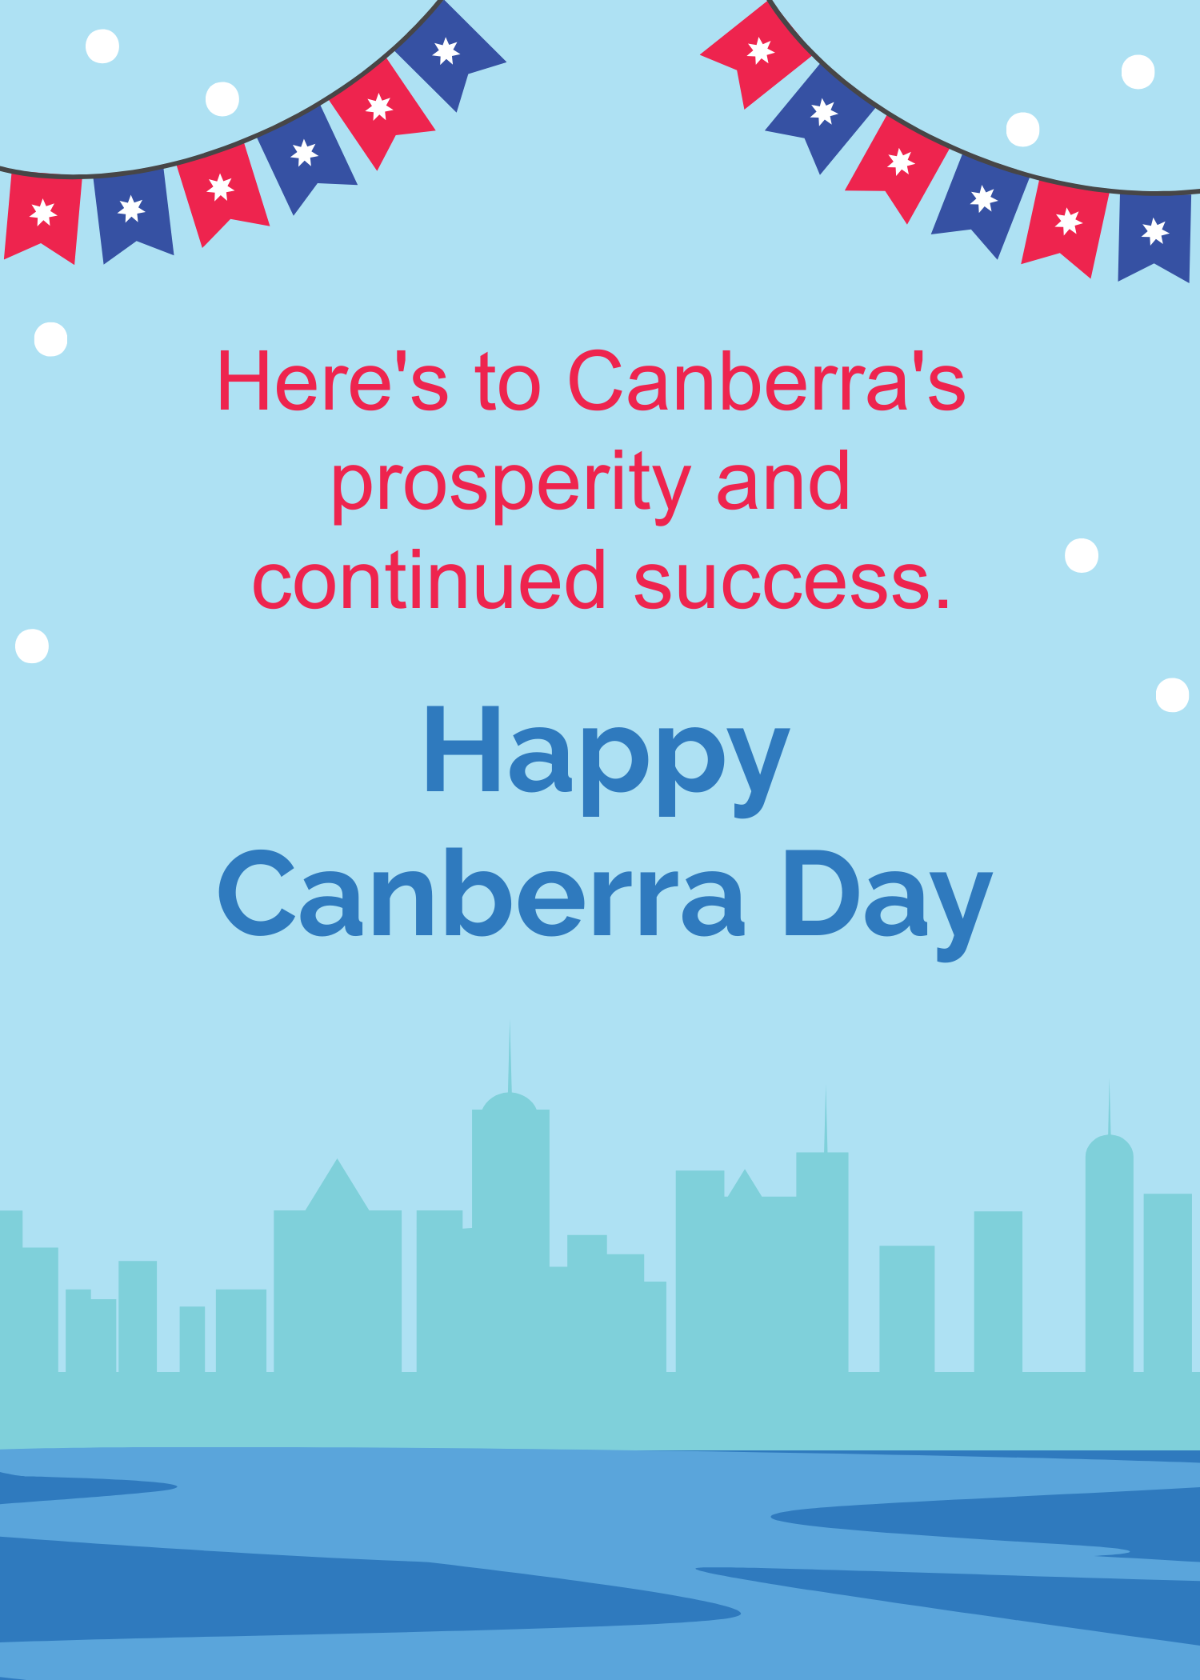 Canberra Day Greeting Card Template